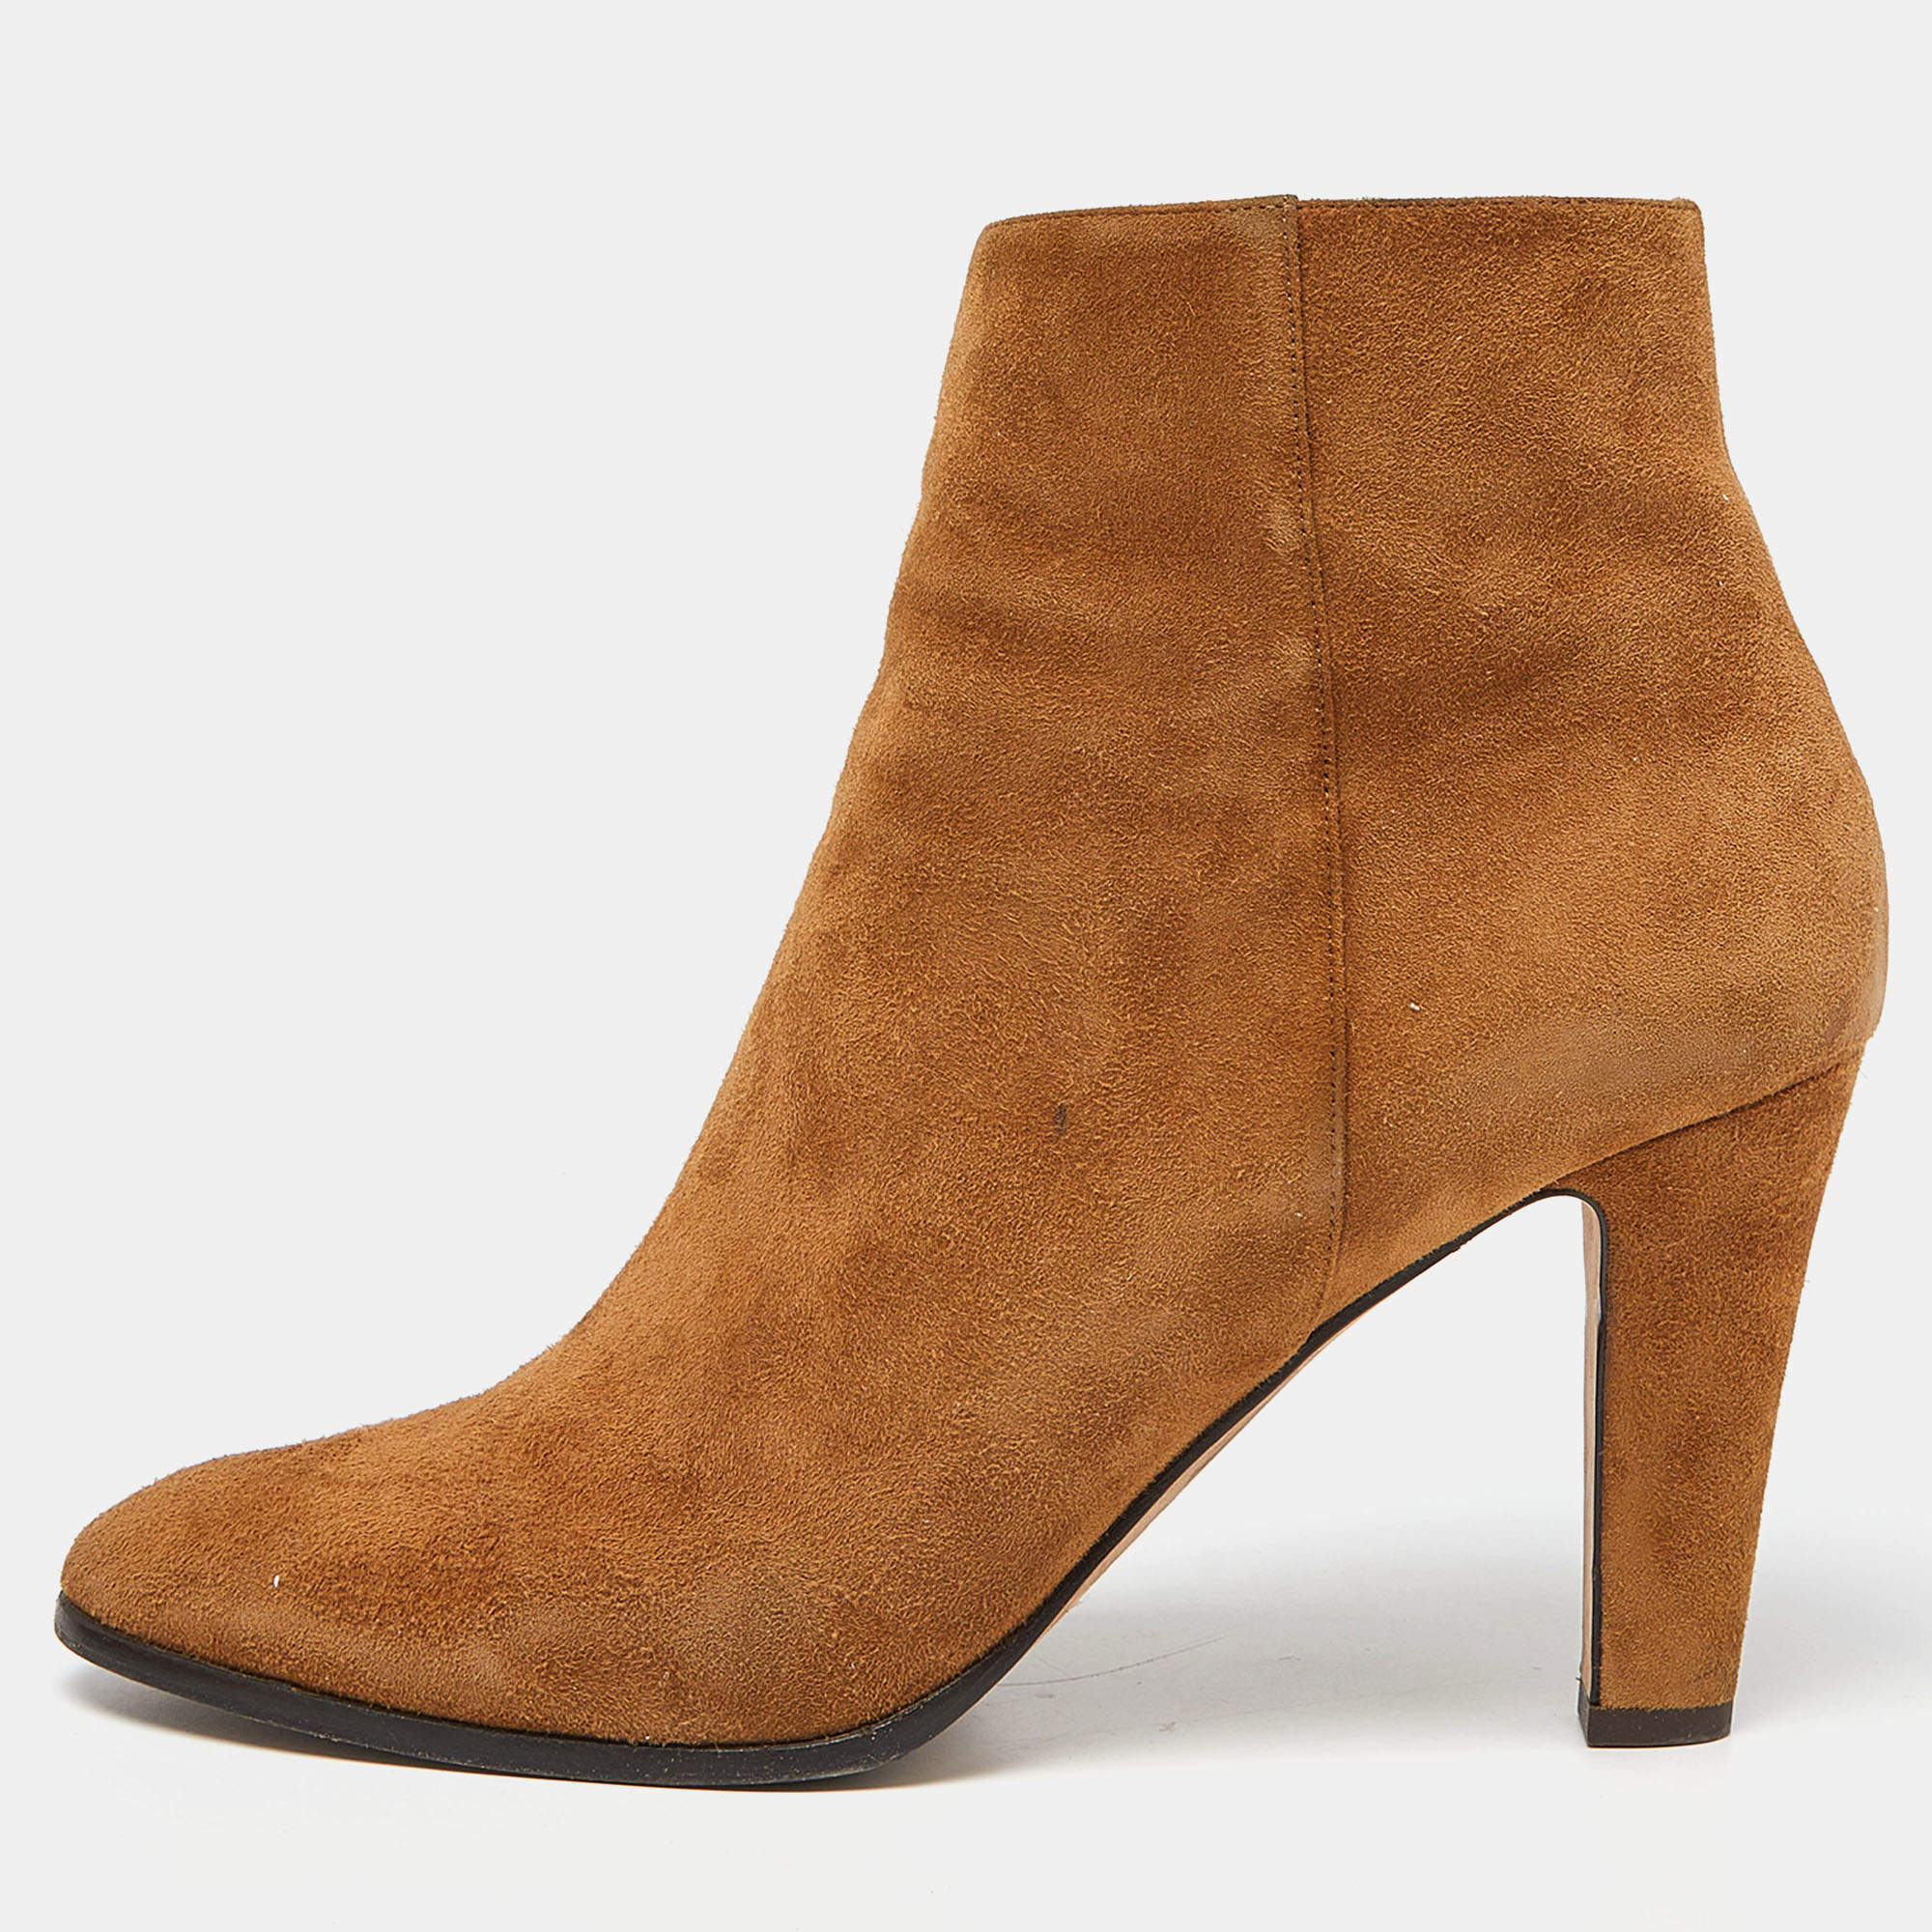 Jimmy Choo Tan Suede Ankle Length Booties Size 40.5